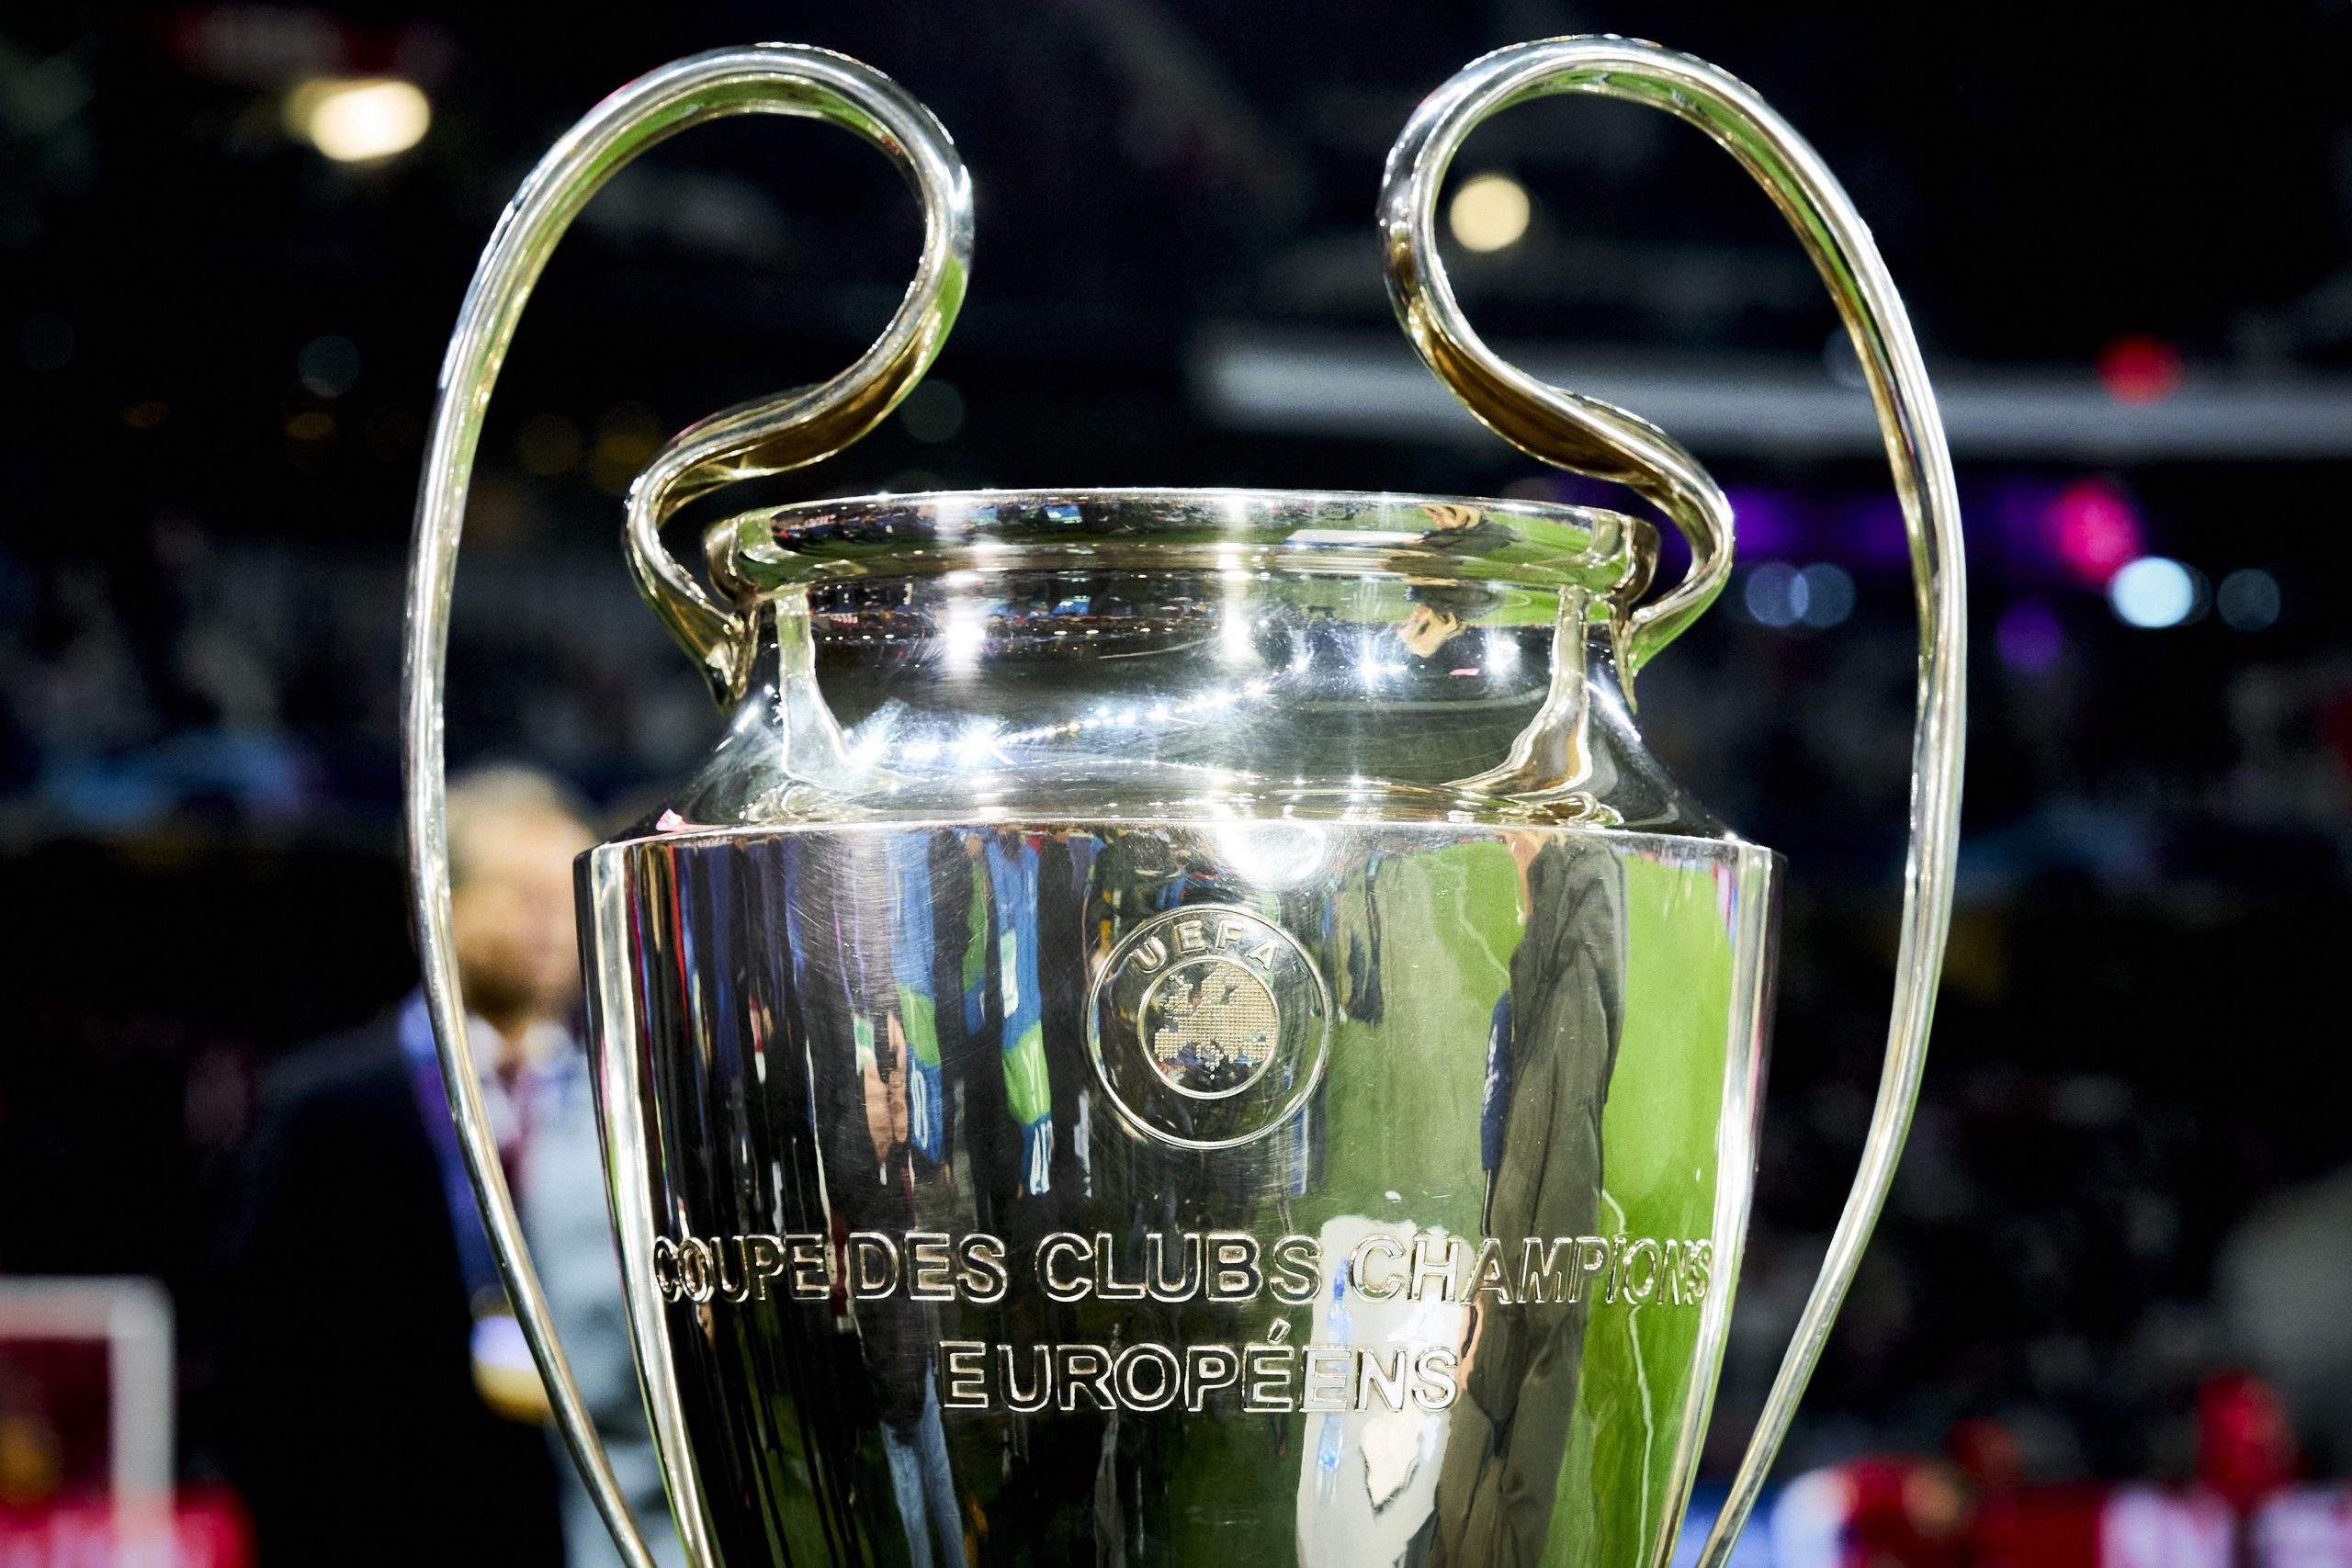 Champions League Finale / 2021 Uefa Champions League Final Wikipedia : The uefa champions league (usually referred to as the champions league ) is an annual the same two clubs faced each other again in the 2016 final.